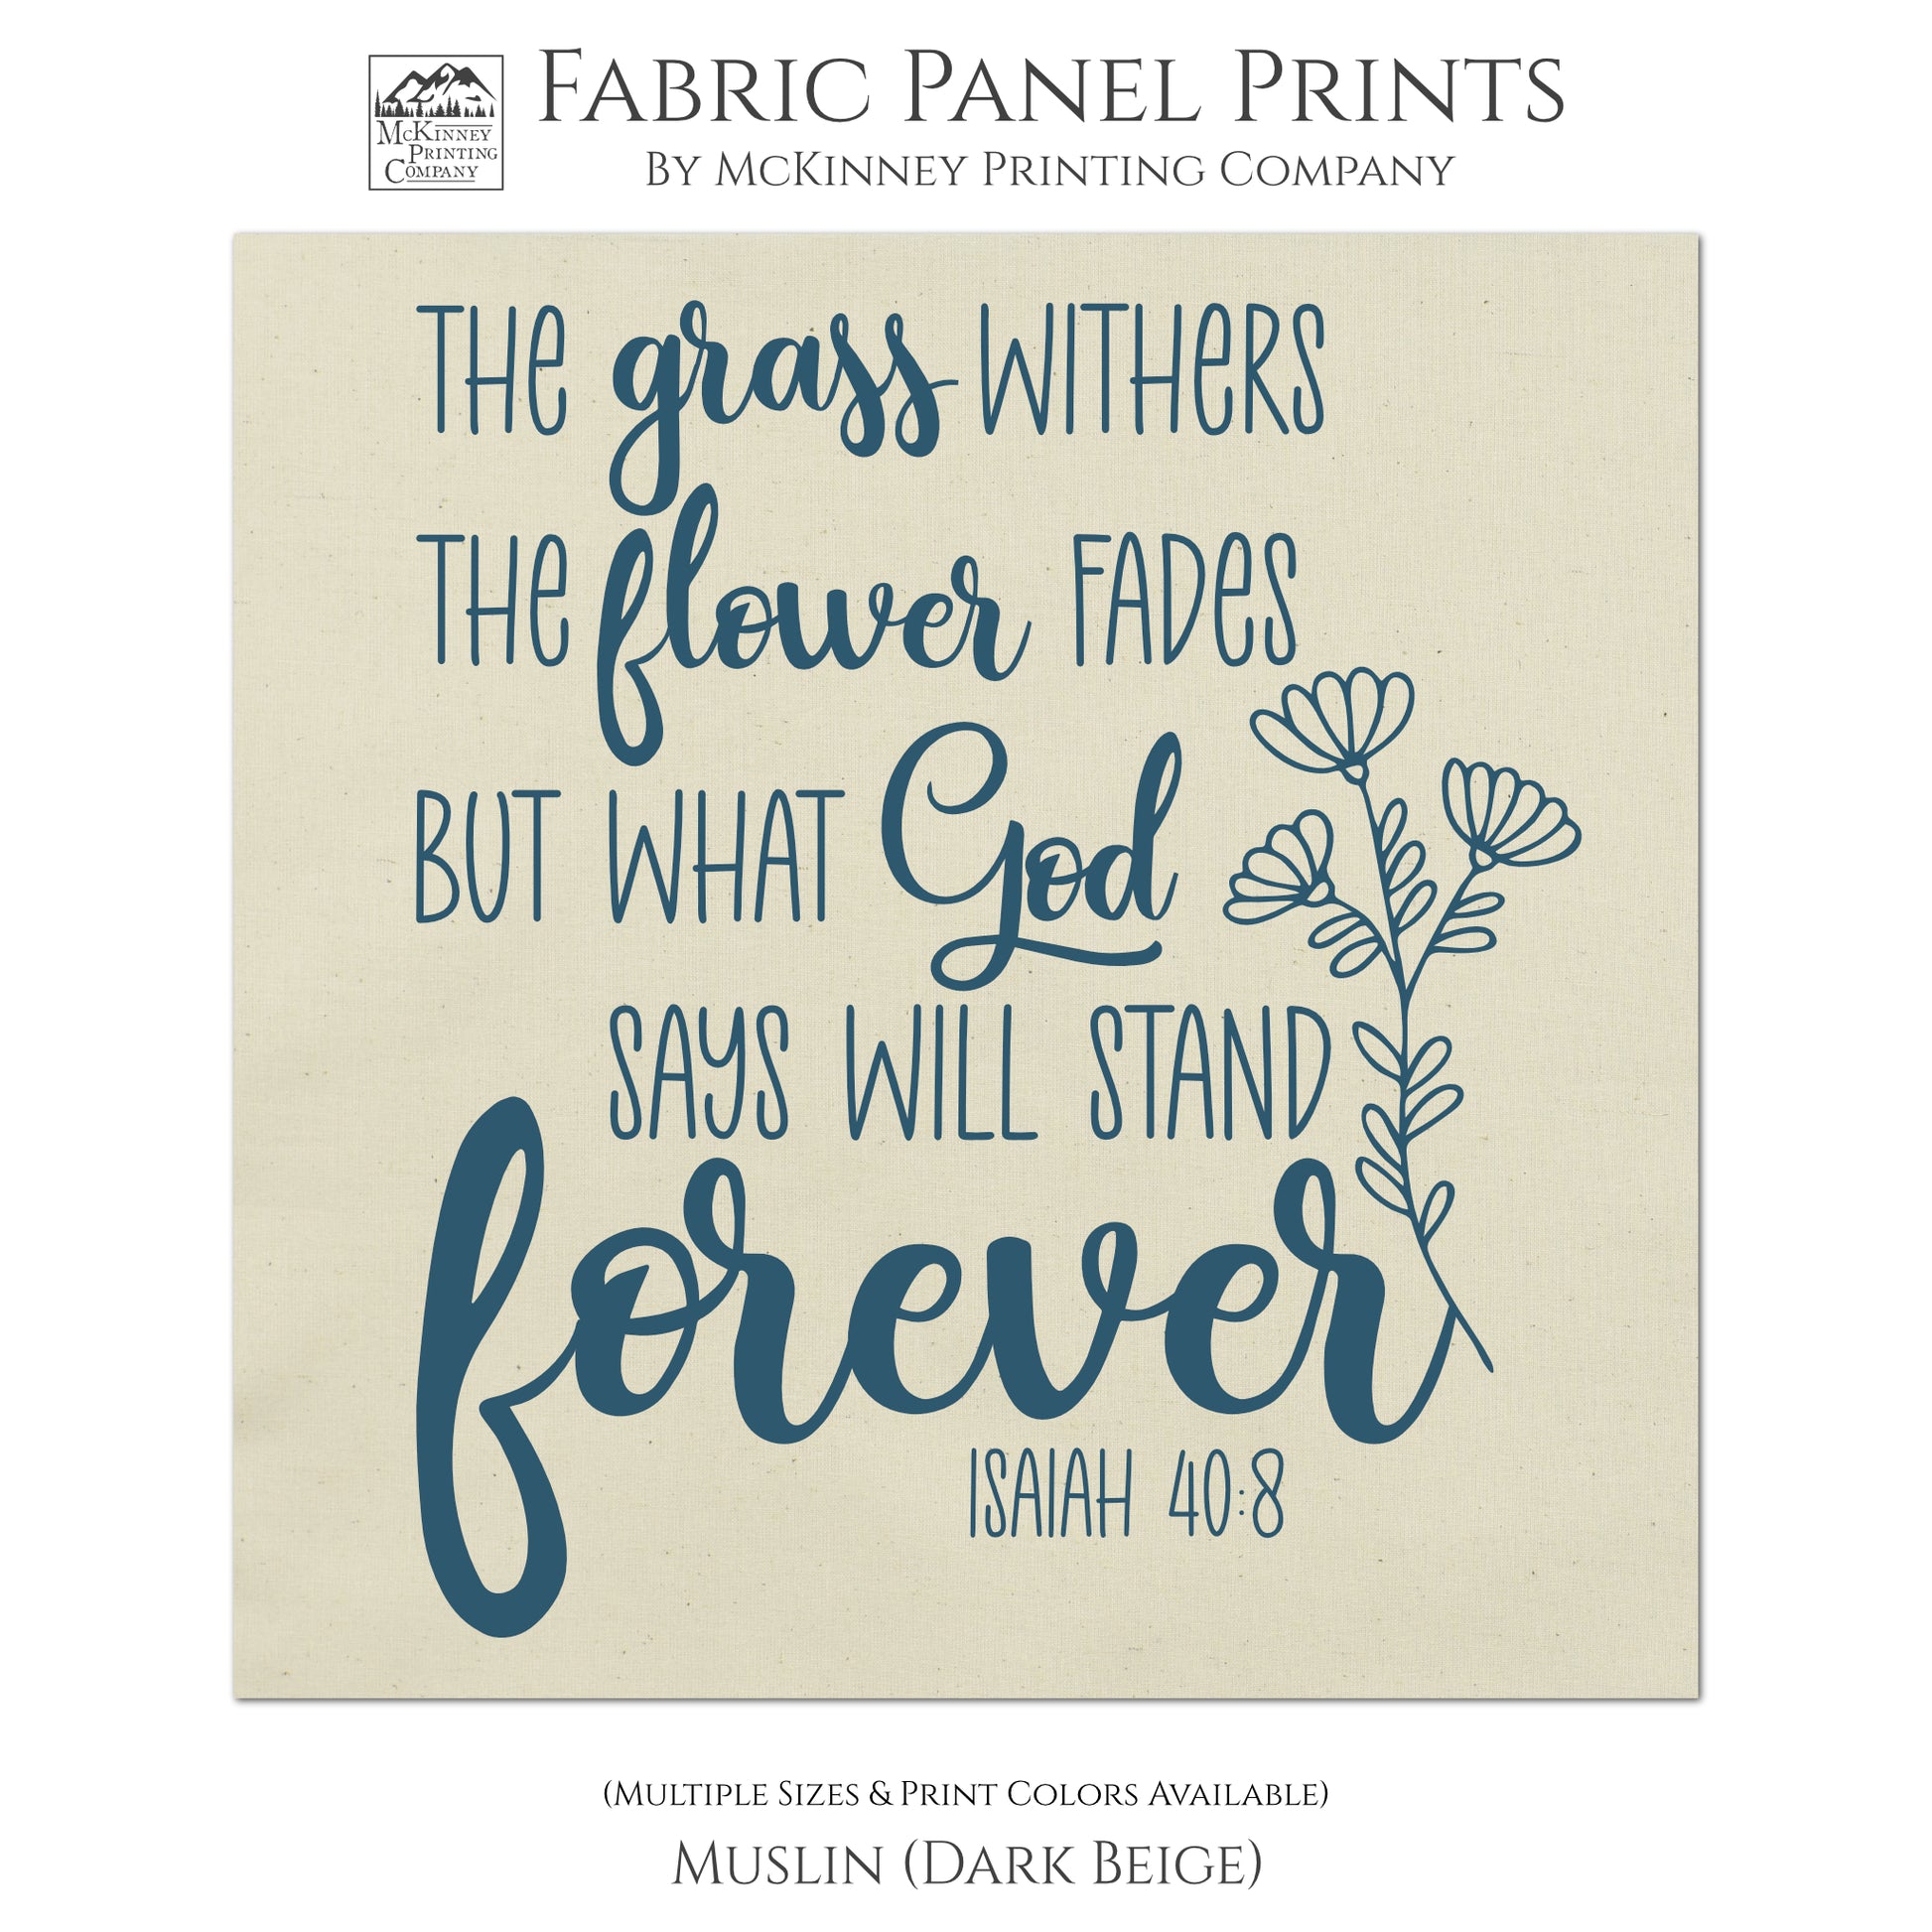 The Grass withers the flower fades but what God says will stand forever. - Isaiah 40 8, Christian, Religious Fabric, Quilt, Wall Art, Small Print Fabric, Large Print Fabric - Muslin